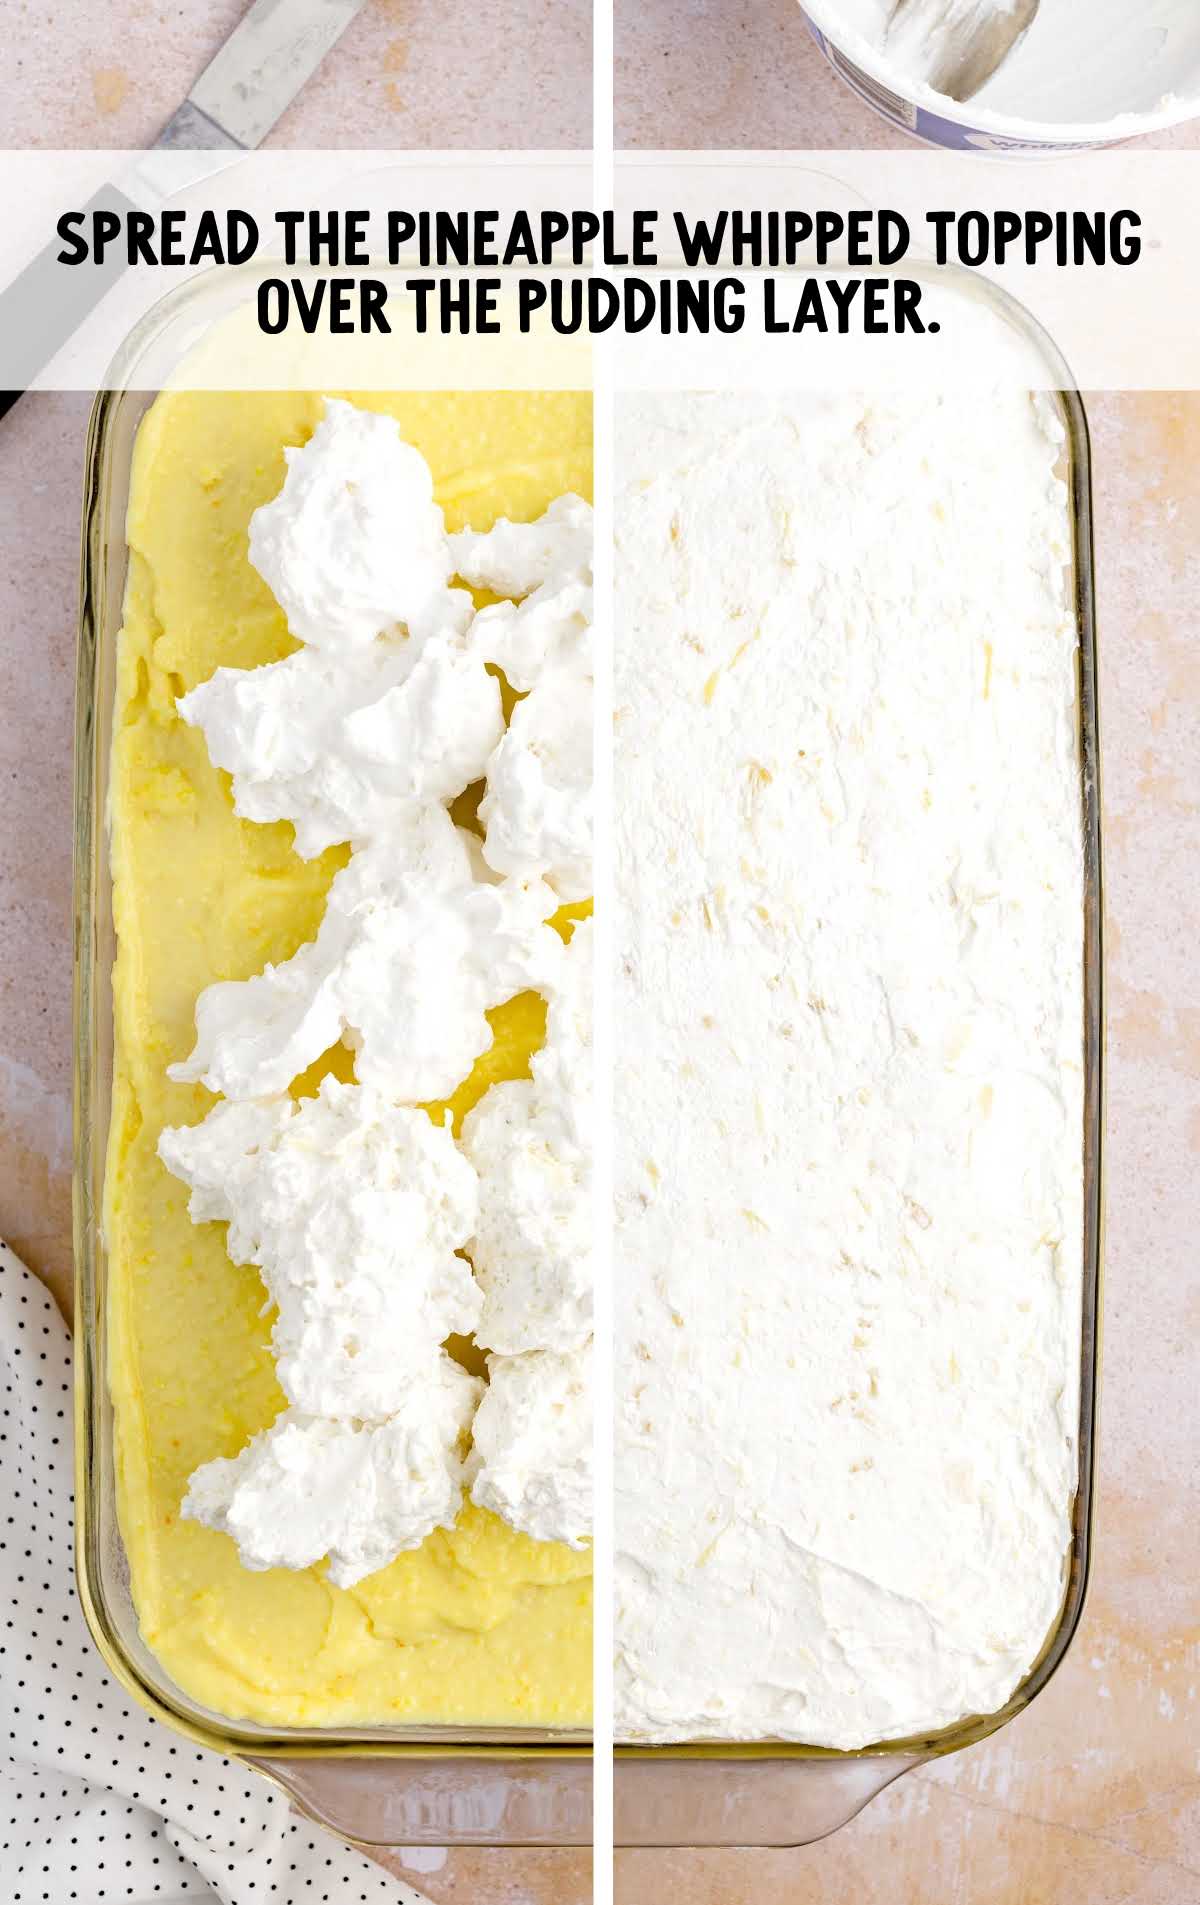 pineapple whipped topping spread over the pudding layer